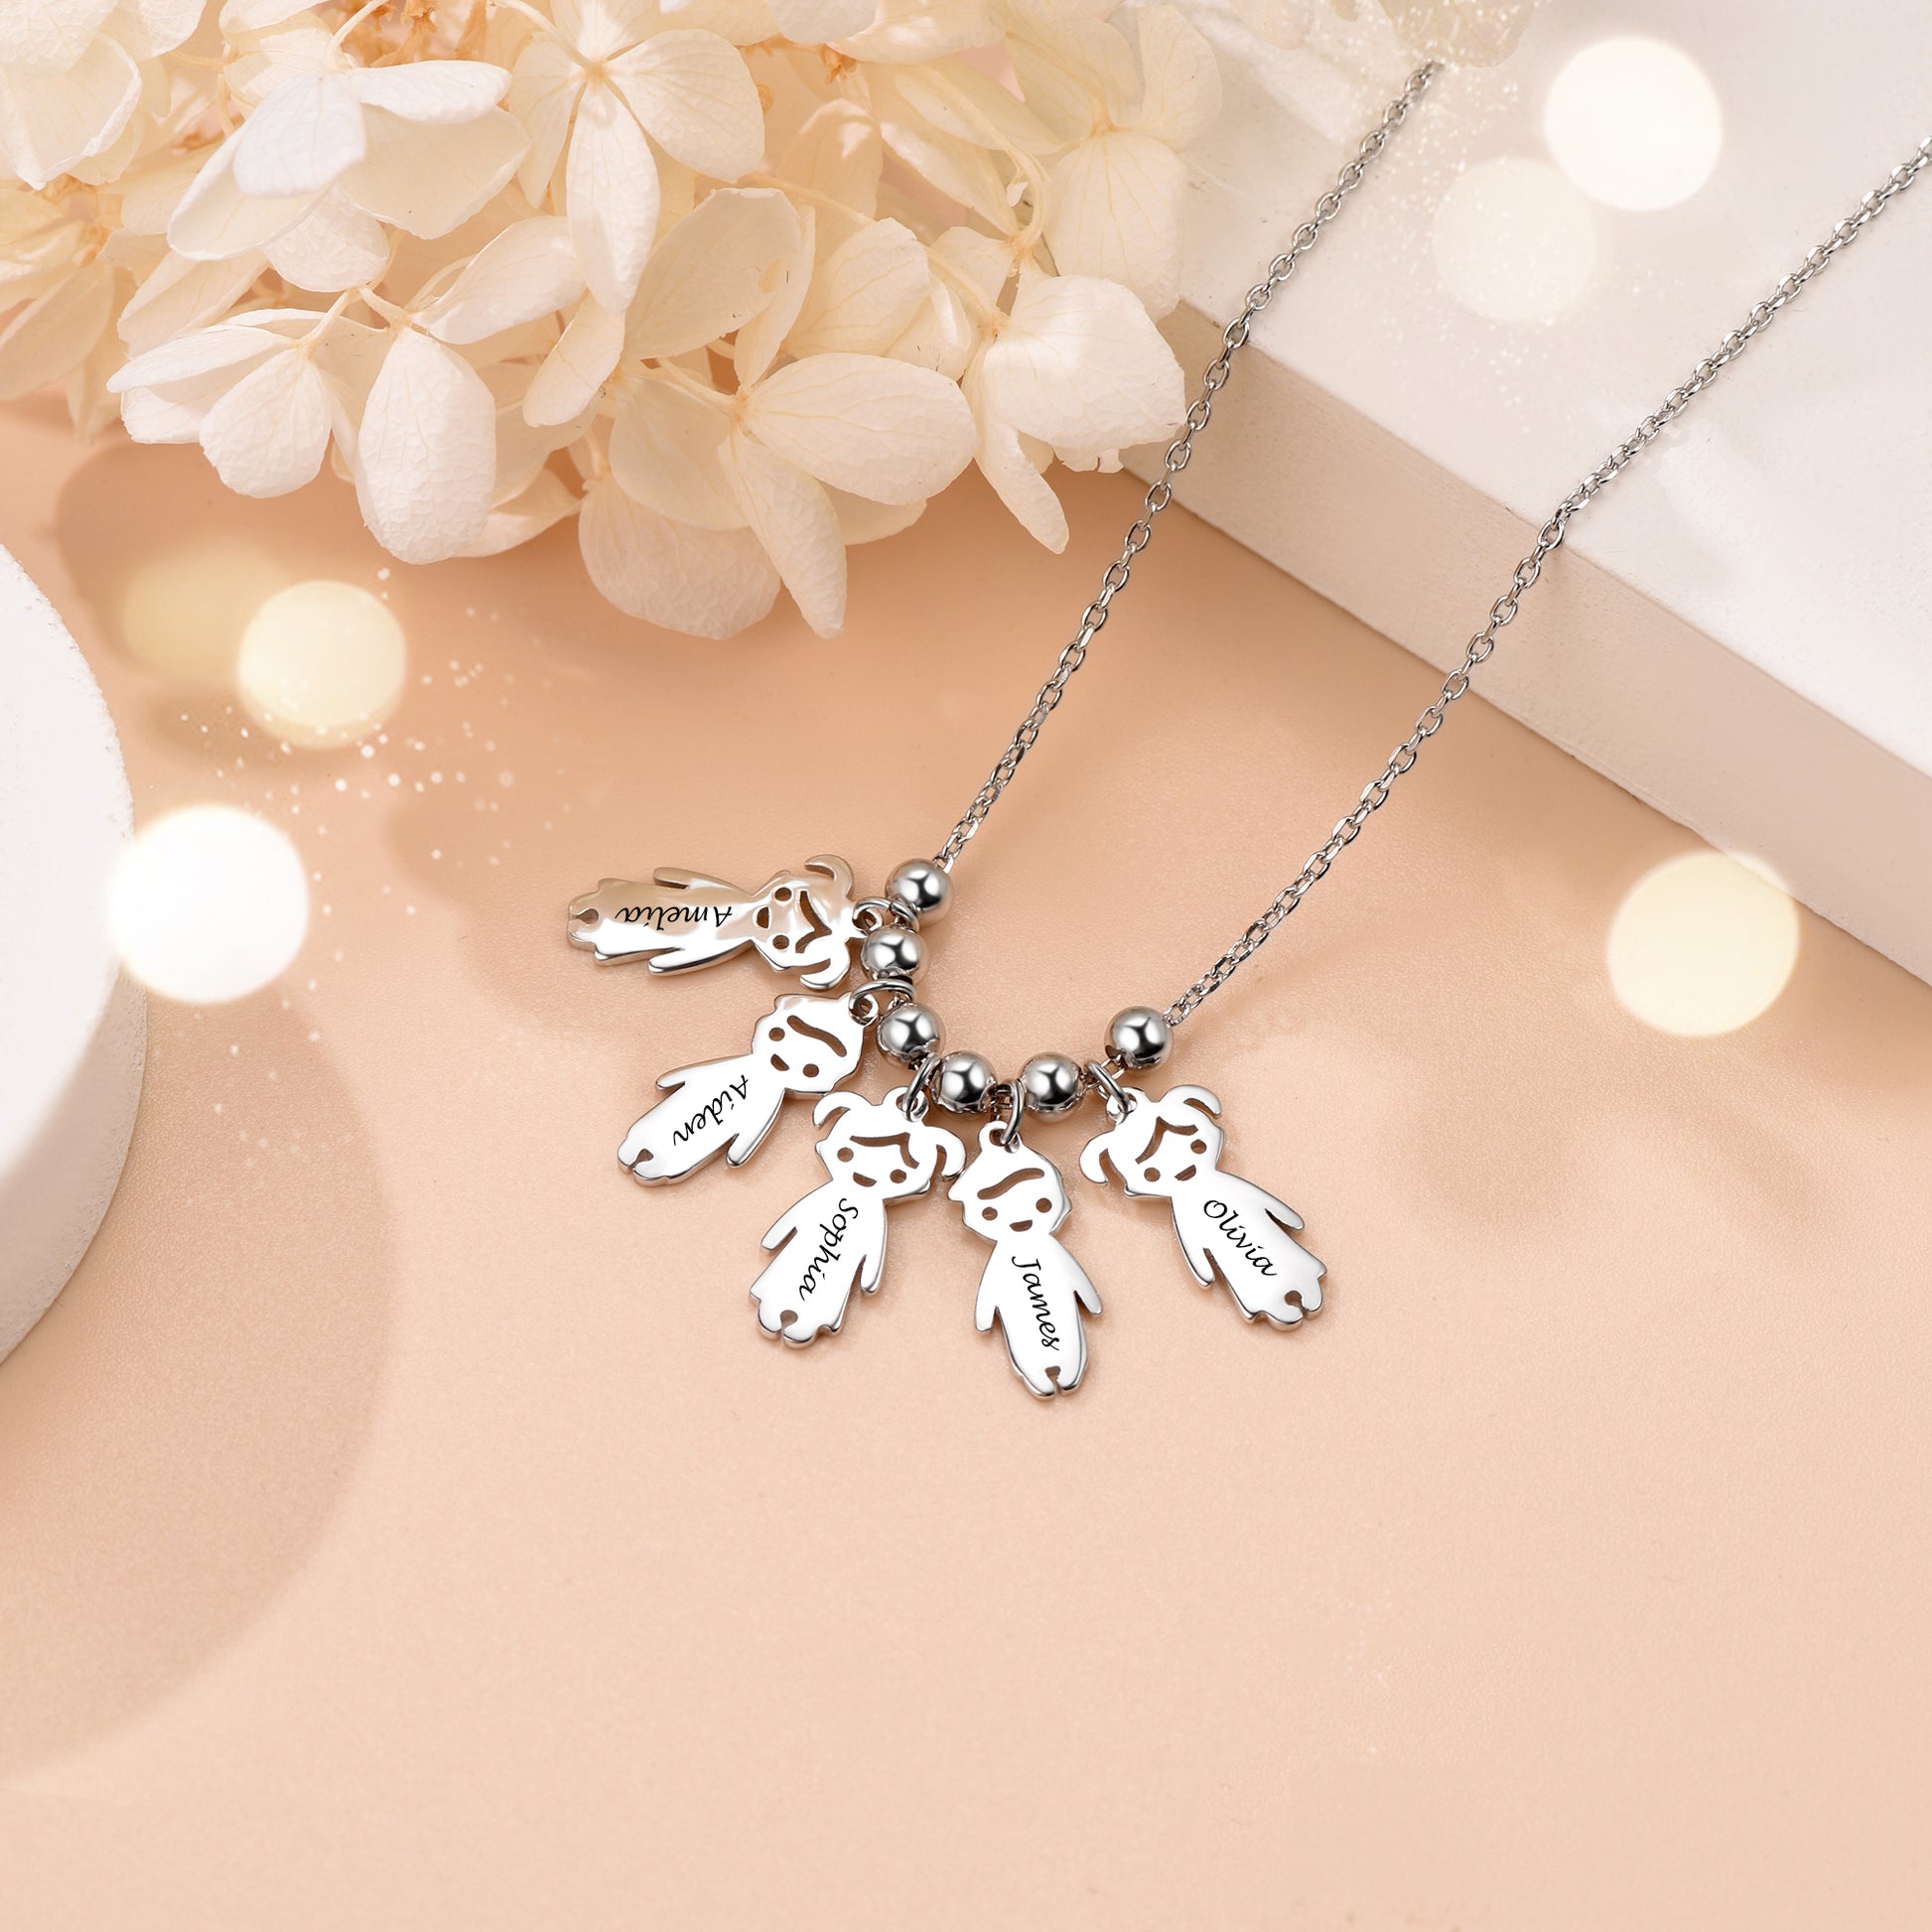 Name Engraved Necklace